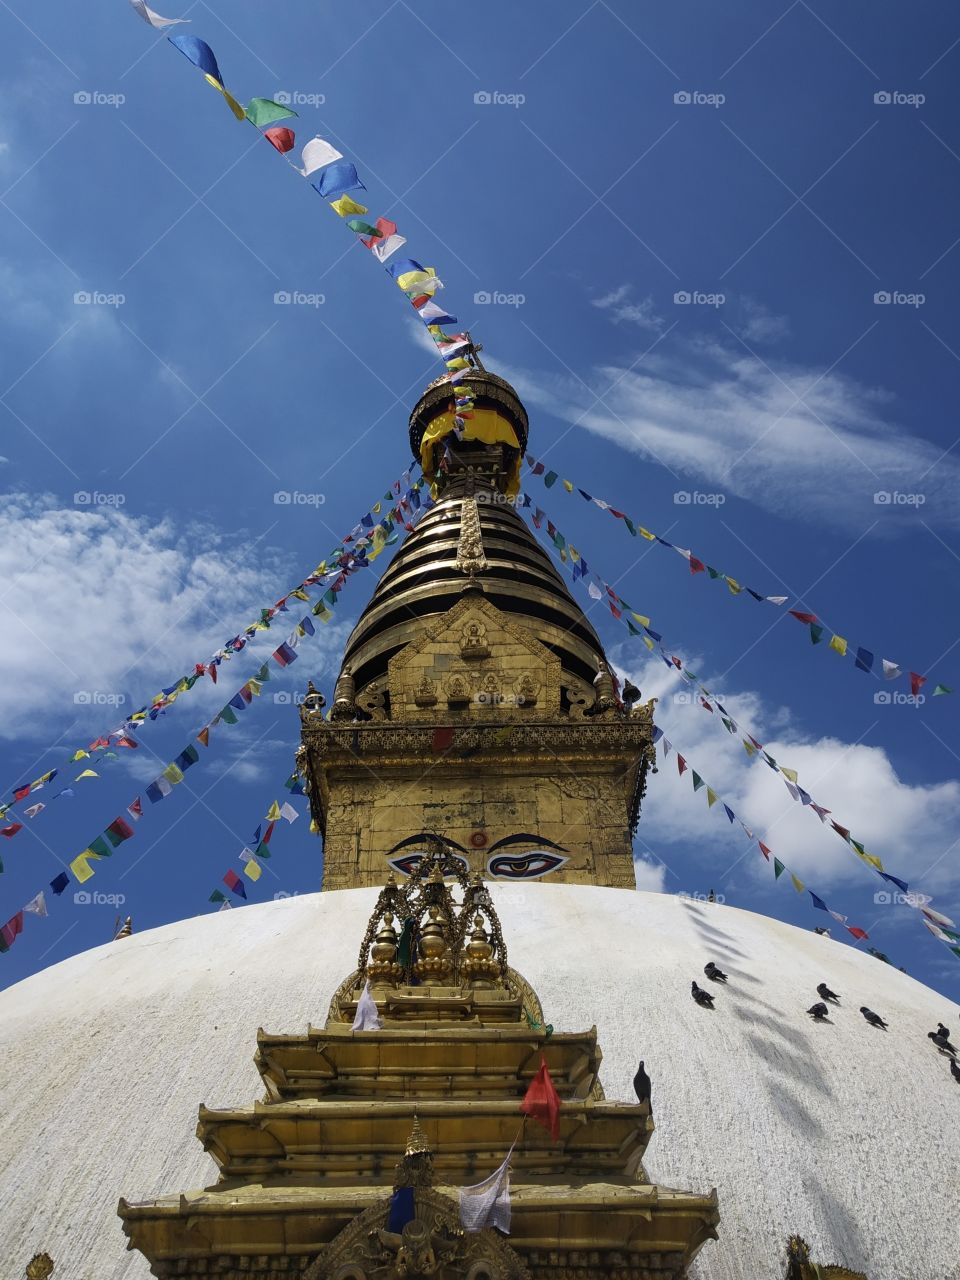 The pick of the stupa is trying to sky and clouds. In fact the stupa represent peace. Those are Buddha eyes and it represents wisdom & compassion